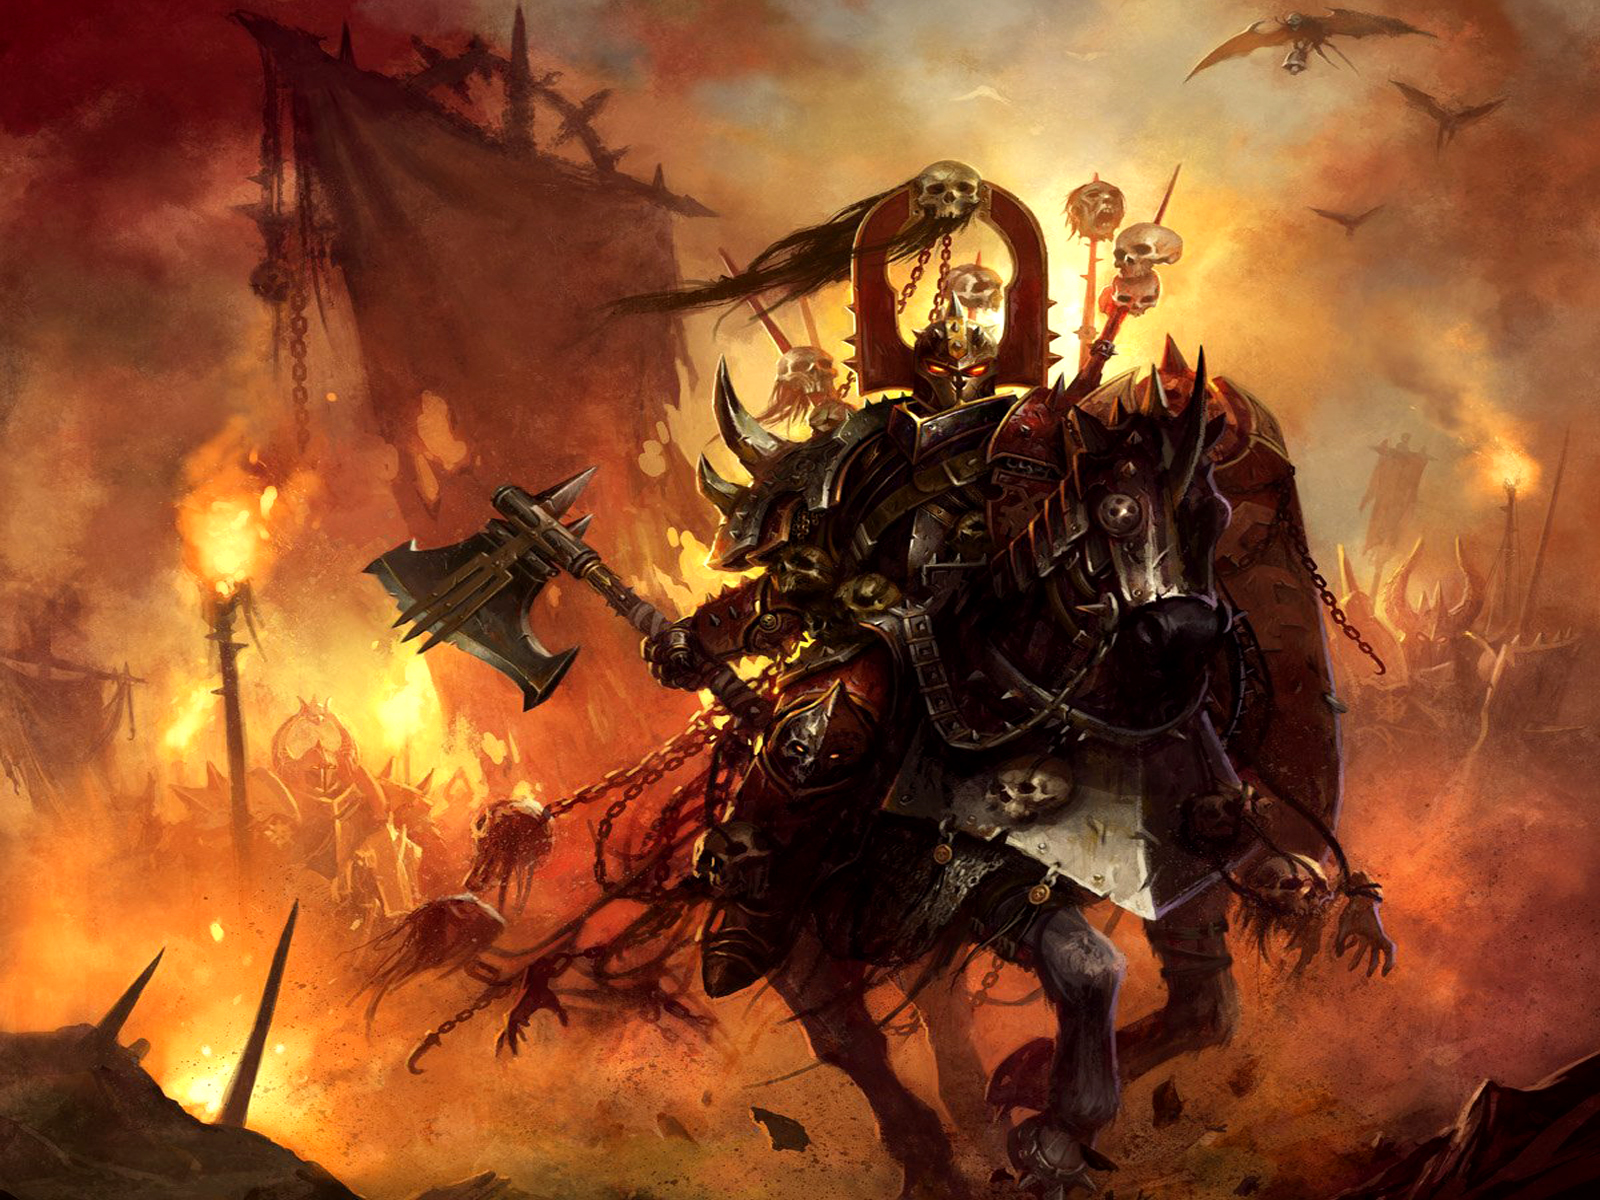 Warhammer Chaos Wallpaper Background For Free Wallpaper - Warhammer Chaos Knight Art - HD Wallpaper 